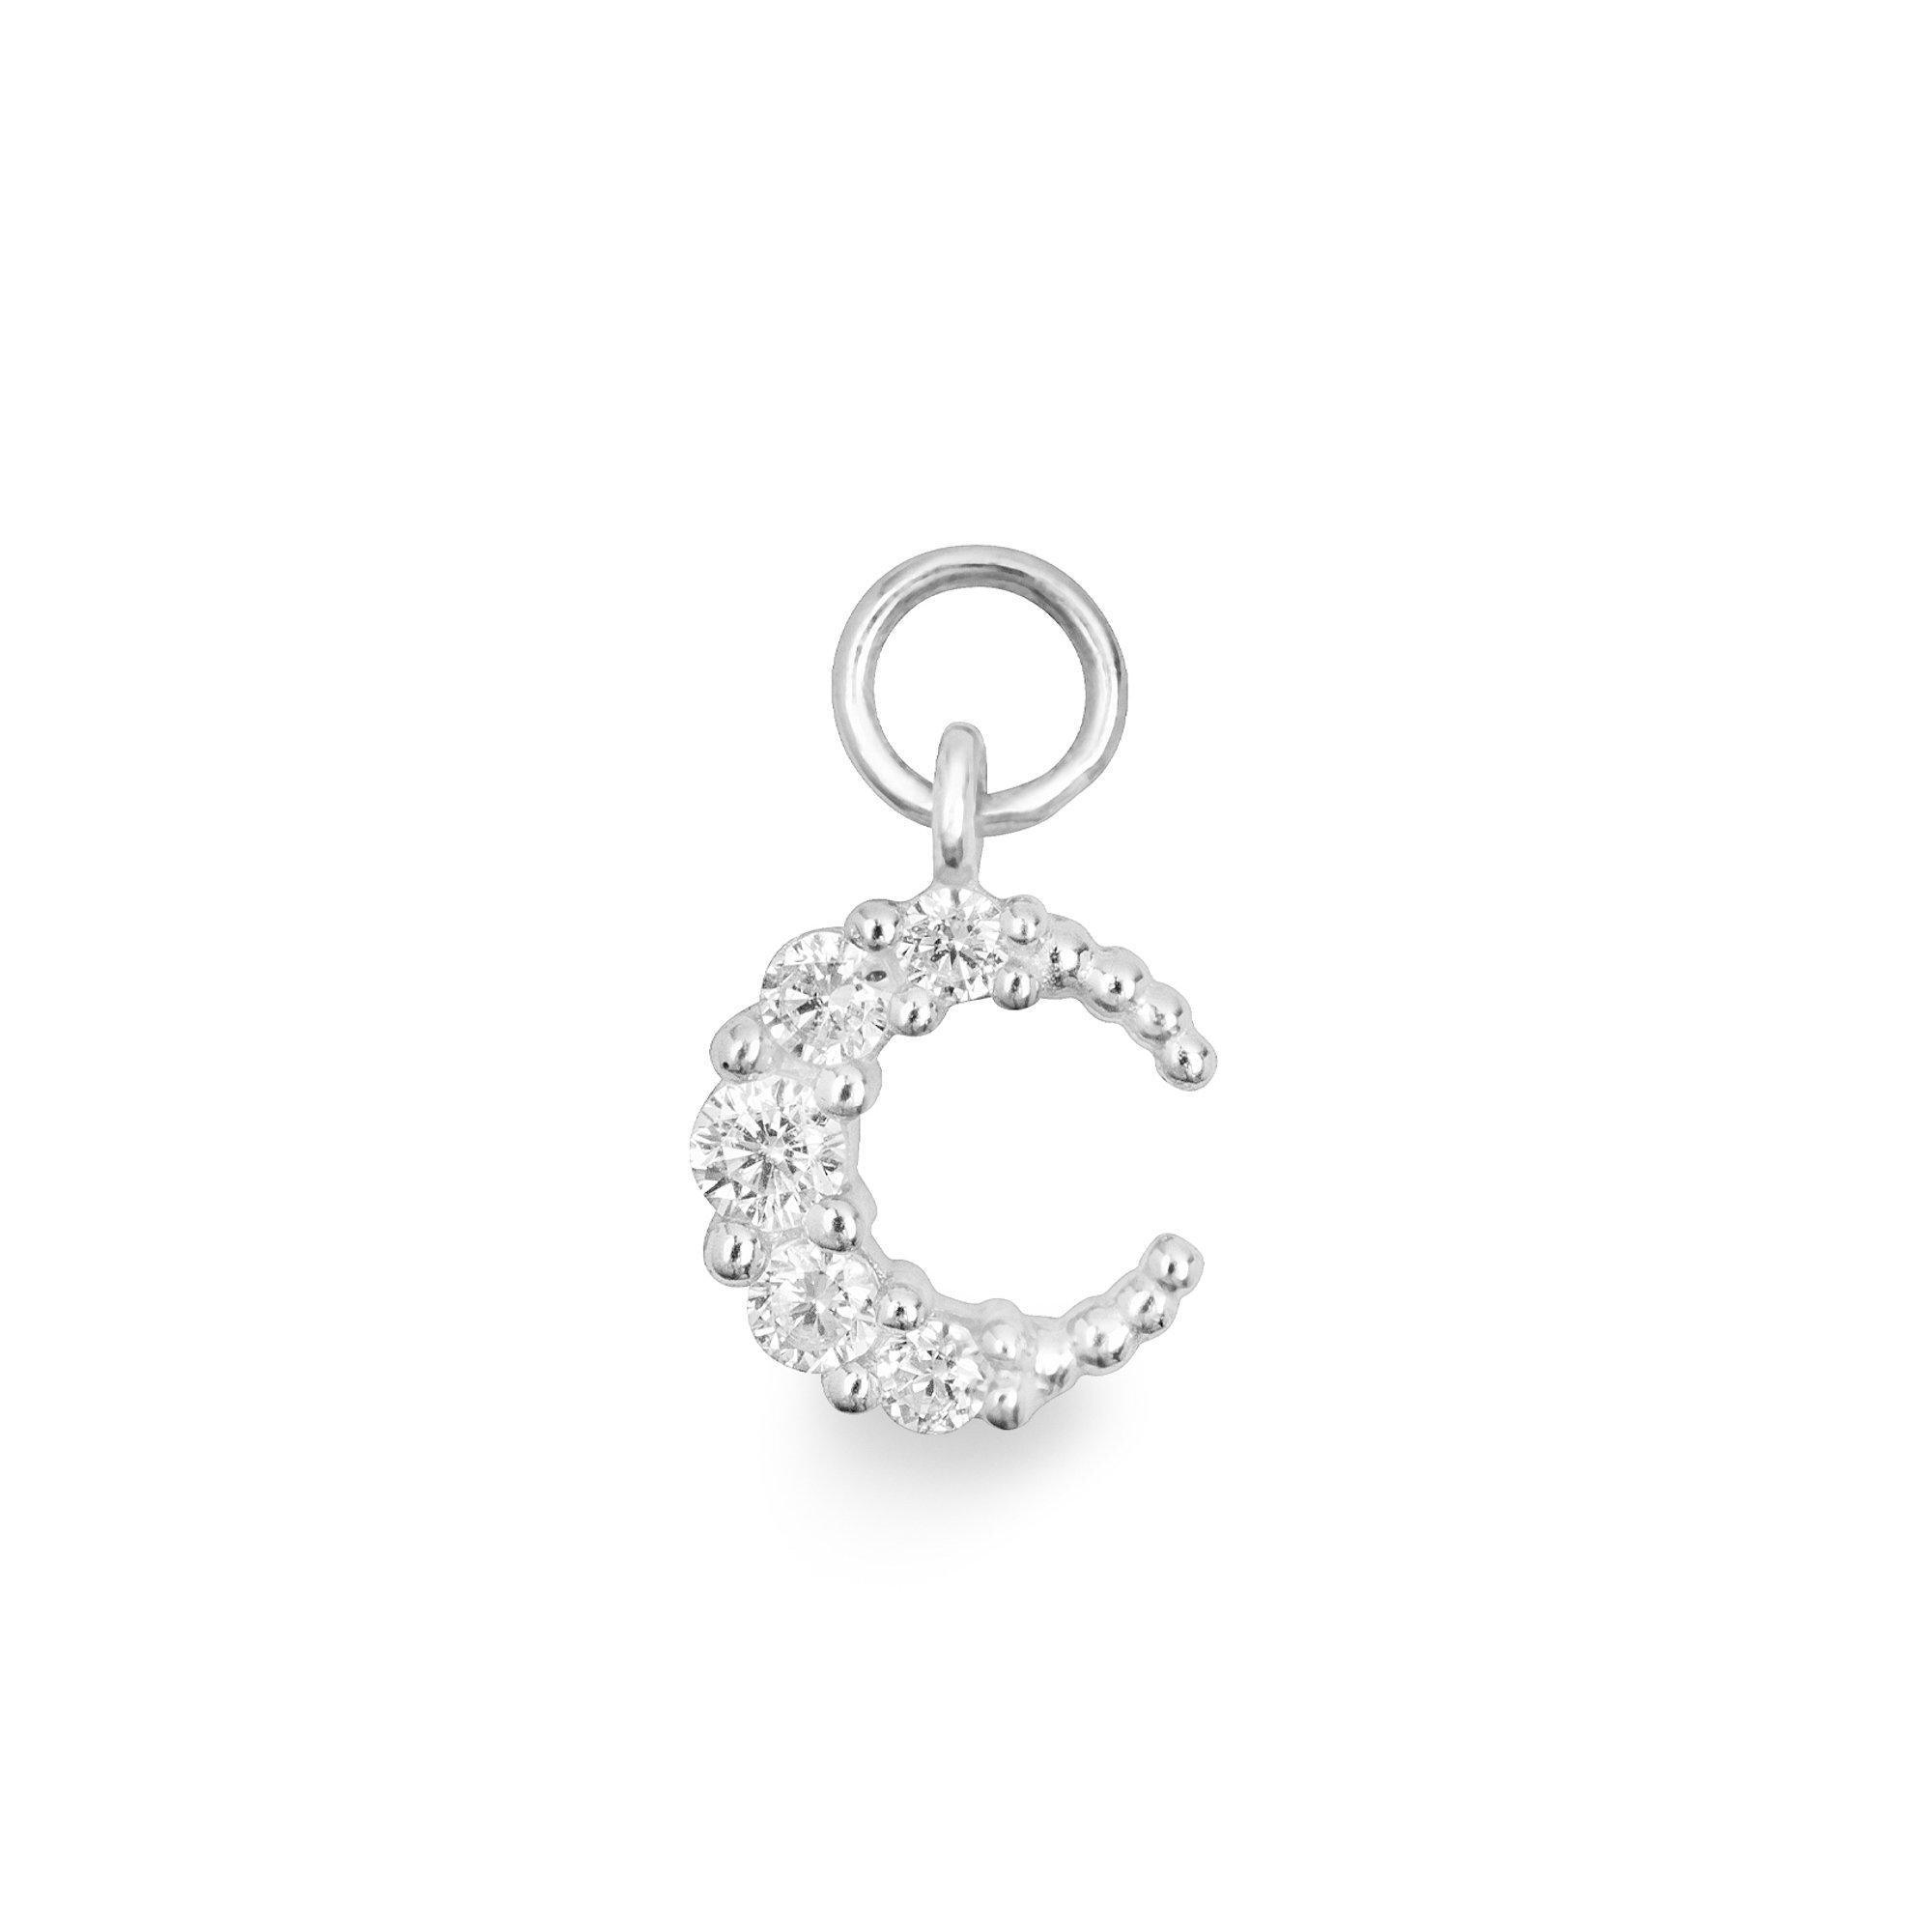 Lune 9k single solid white gold tiny moon charm for hinged segment earring - Helix & Conch